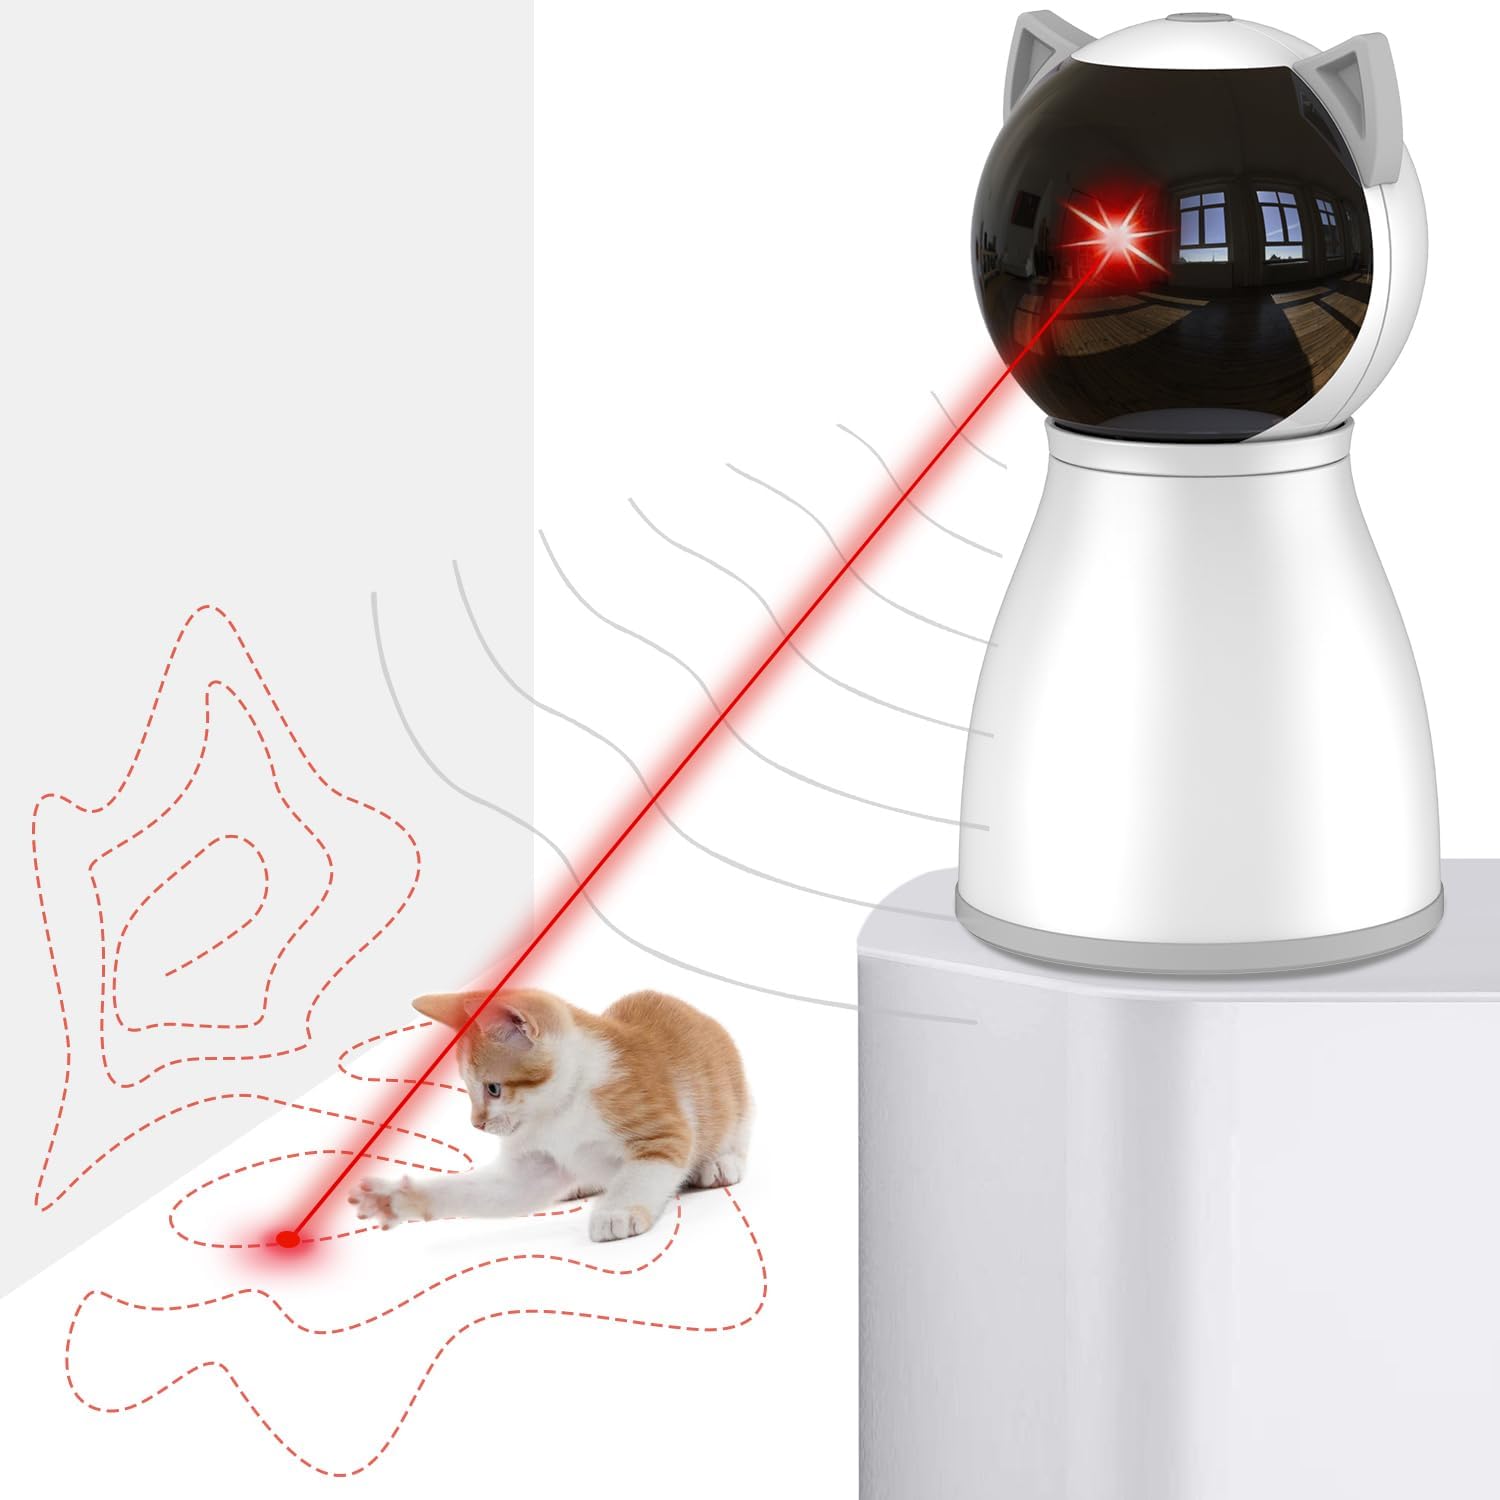 LIFE Cat Toys,The 4th Generation Real Random Trajectory,Motion Activated Rechargeable Automatic Cat Laser Toy,Interactive Cat Toys for Indoor Cats/Kittens/Dogs